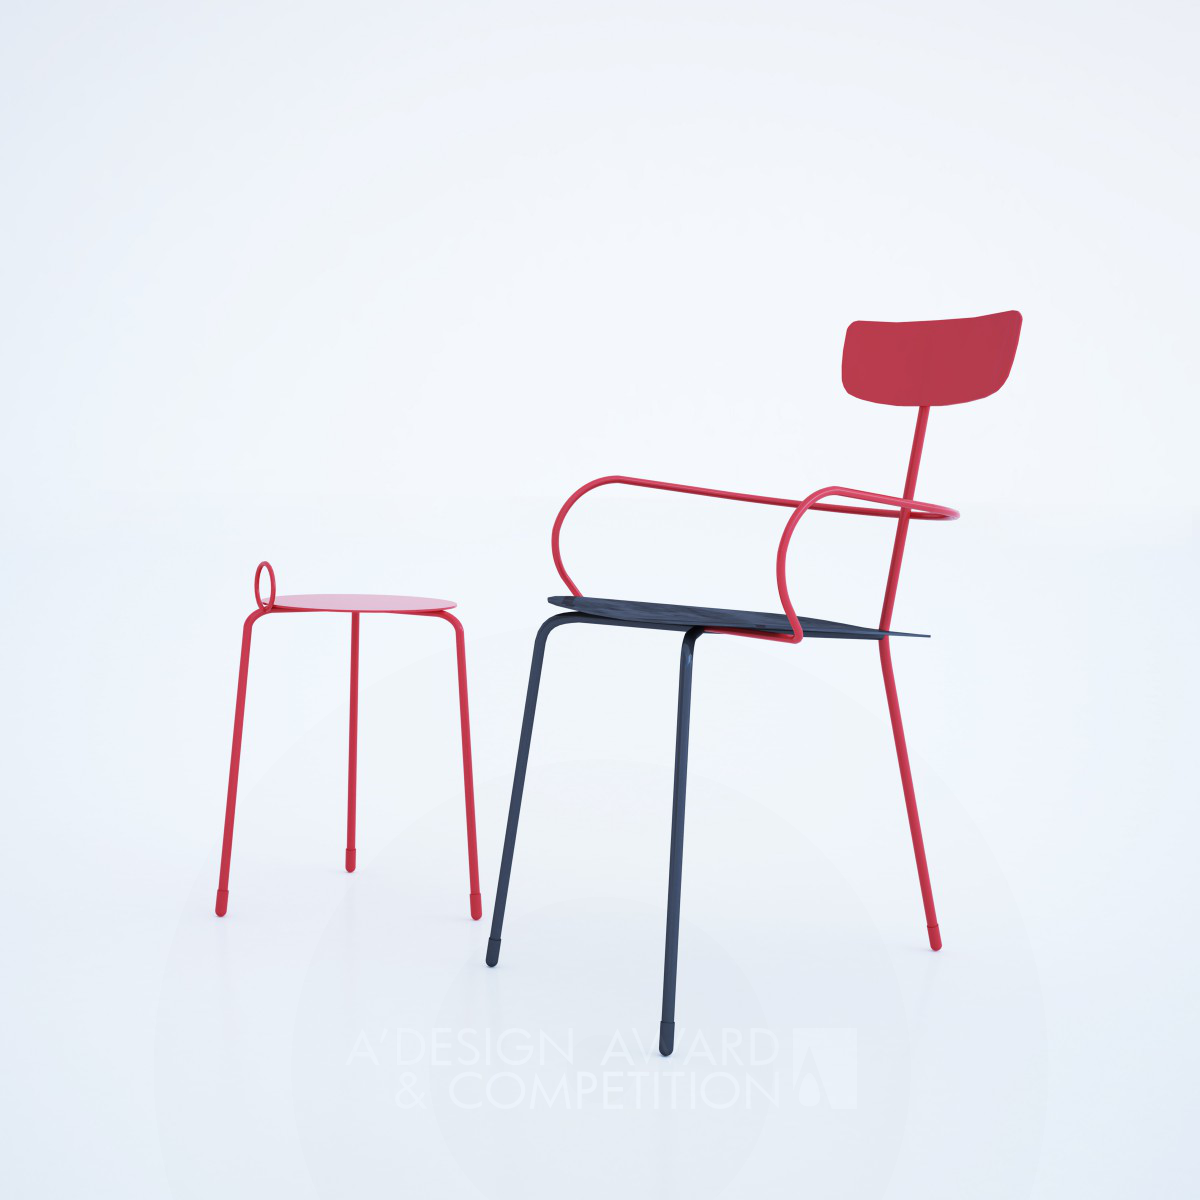 sedi_ale chair and stool by Krama Architects